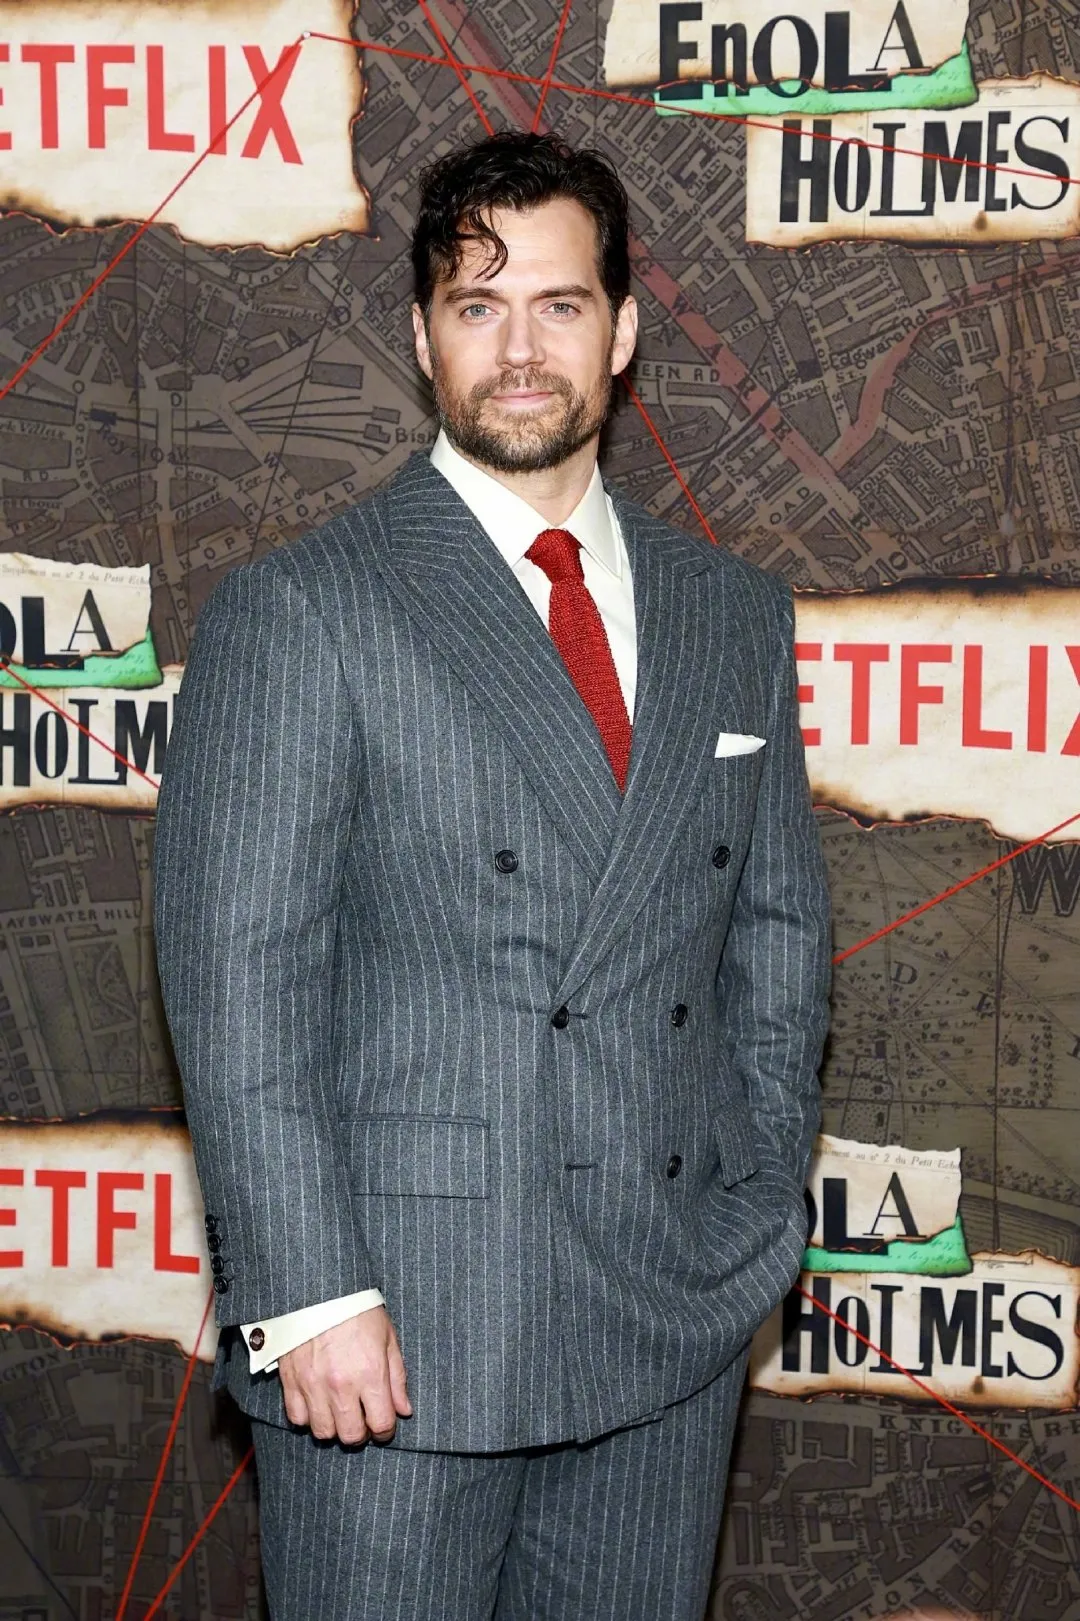 Henry Cavill attends the premiere of 'Enola Holmes 2' in New York | FMV6